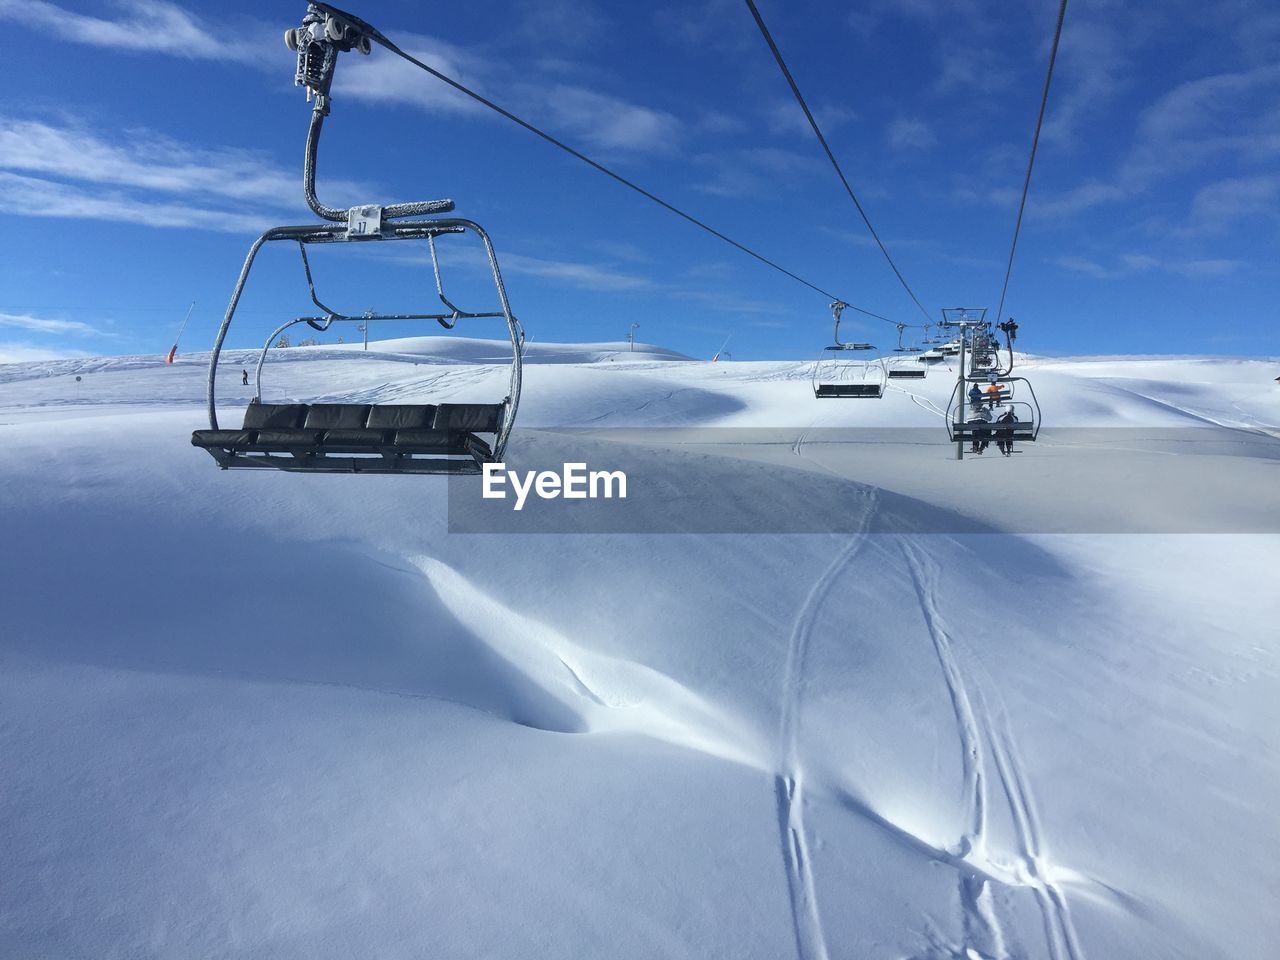 Low angle view of ski lift over snowy field against cloudy sky during sunny day